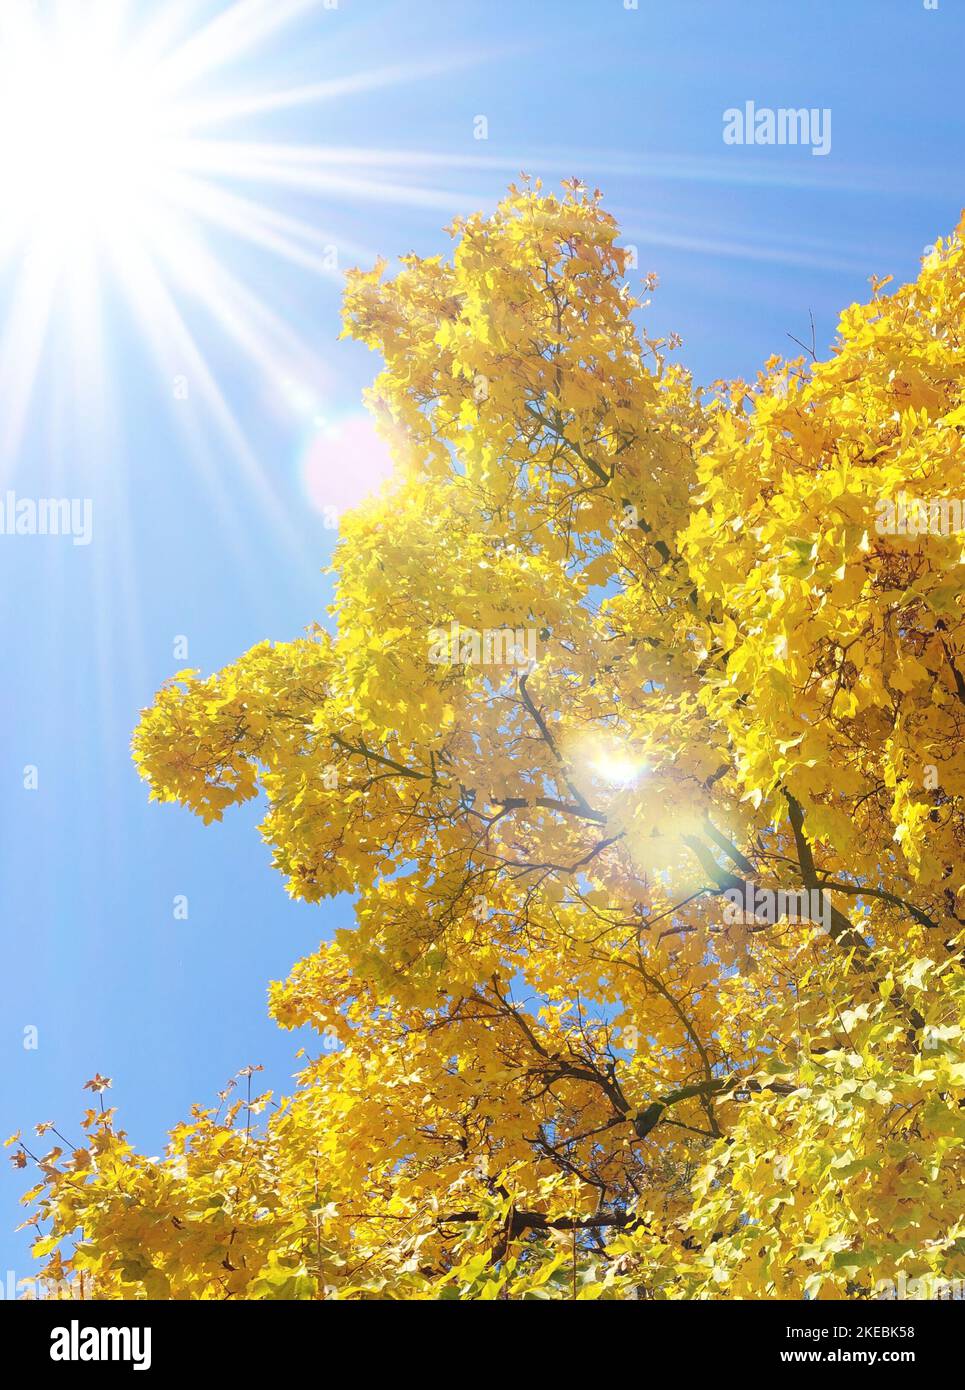 Autumn foliage with yellow leaves and sun rays. Stock Photo